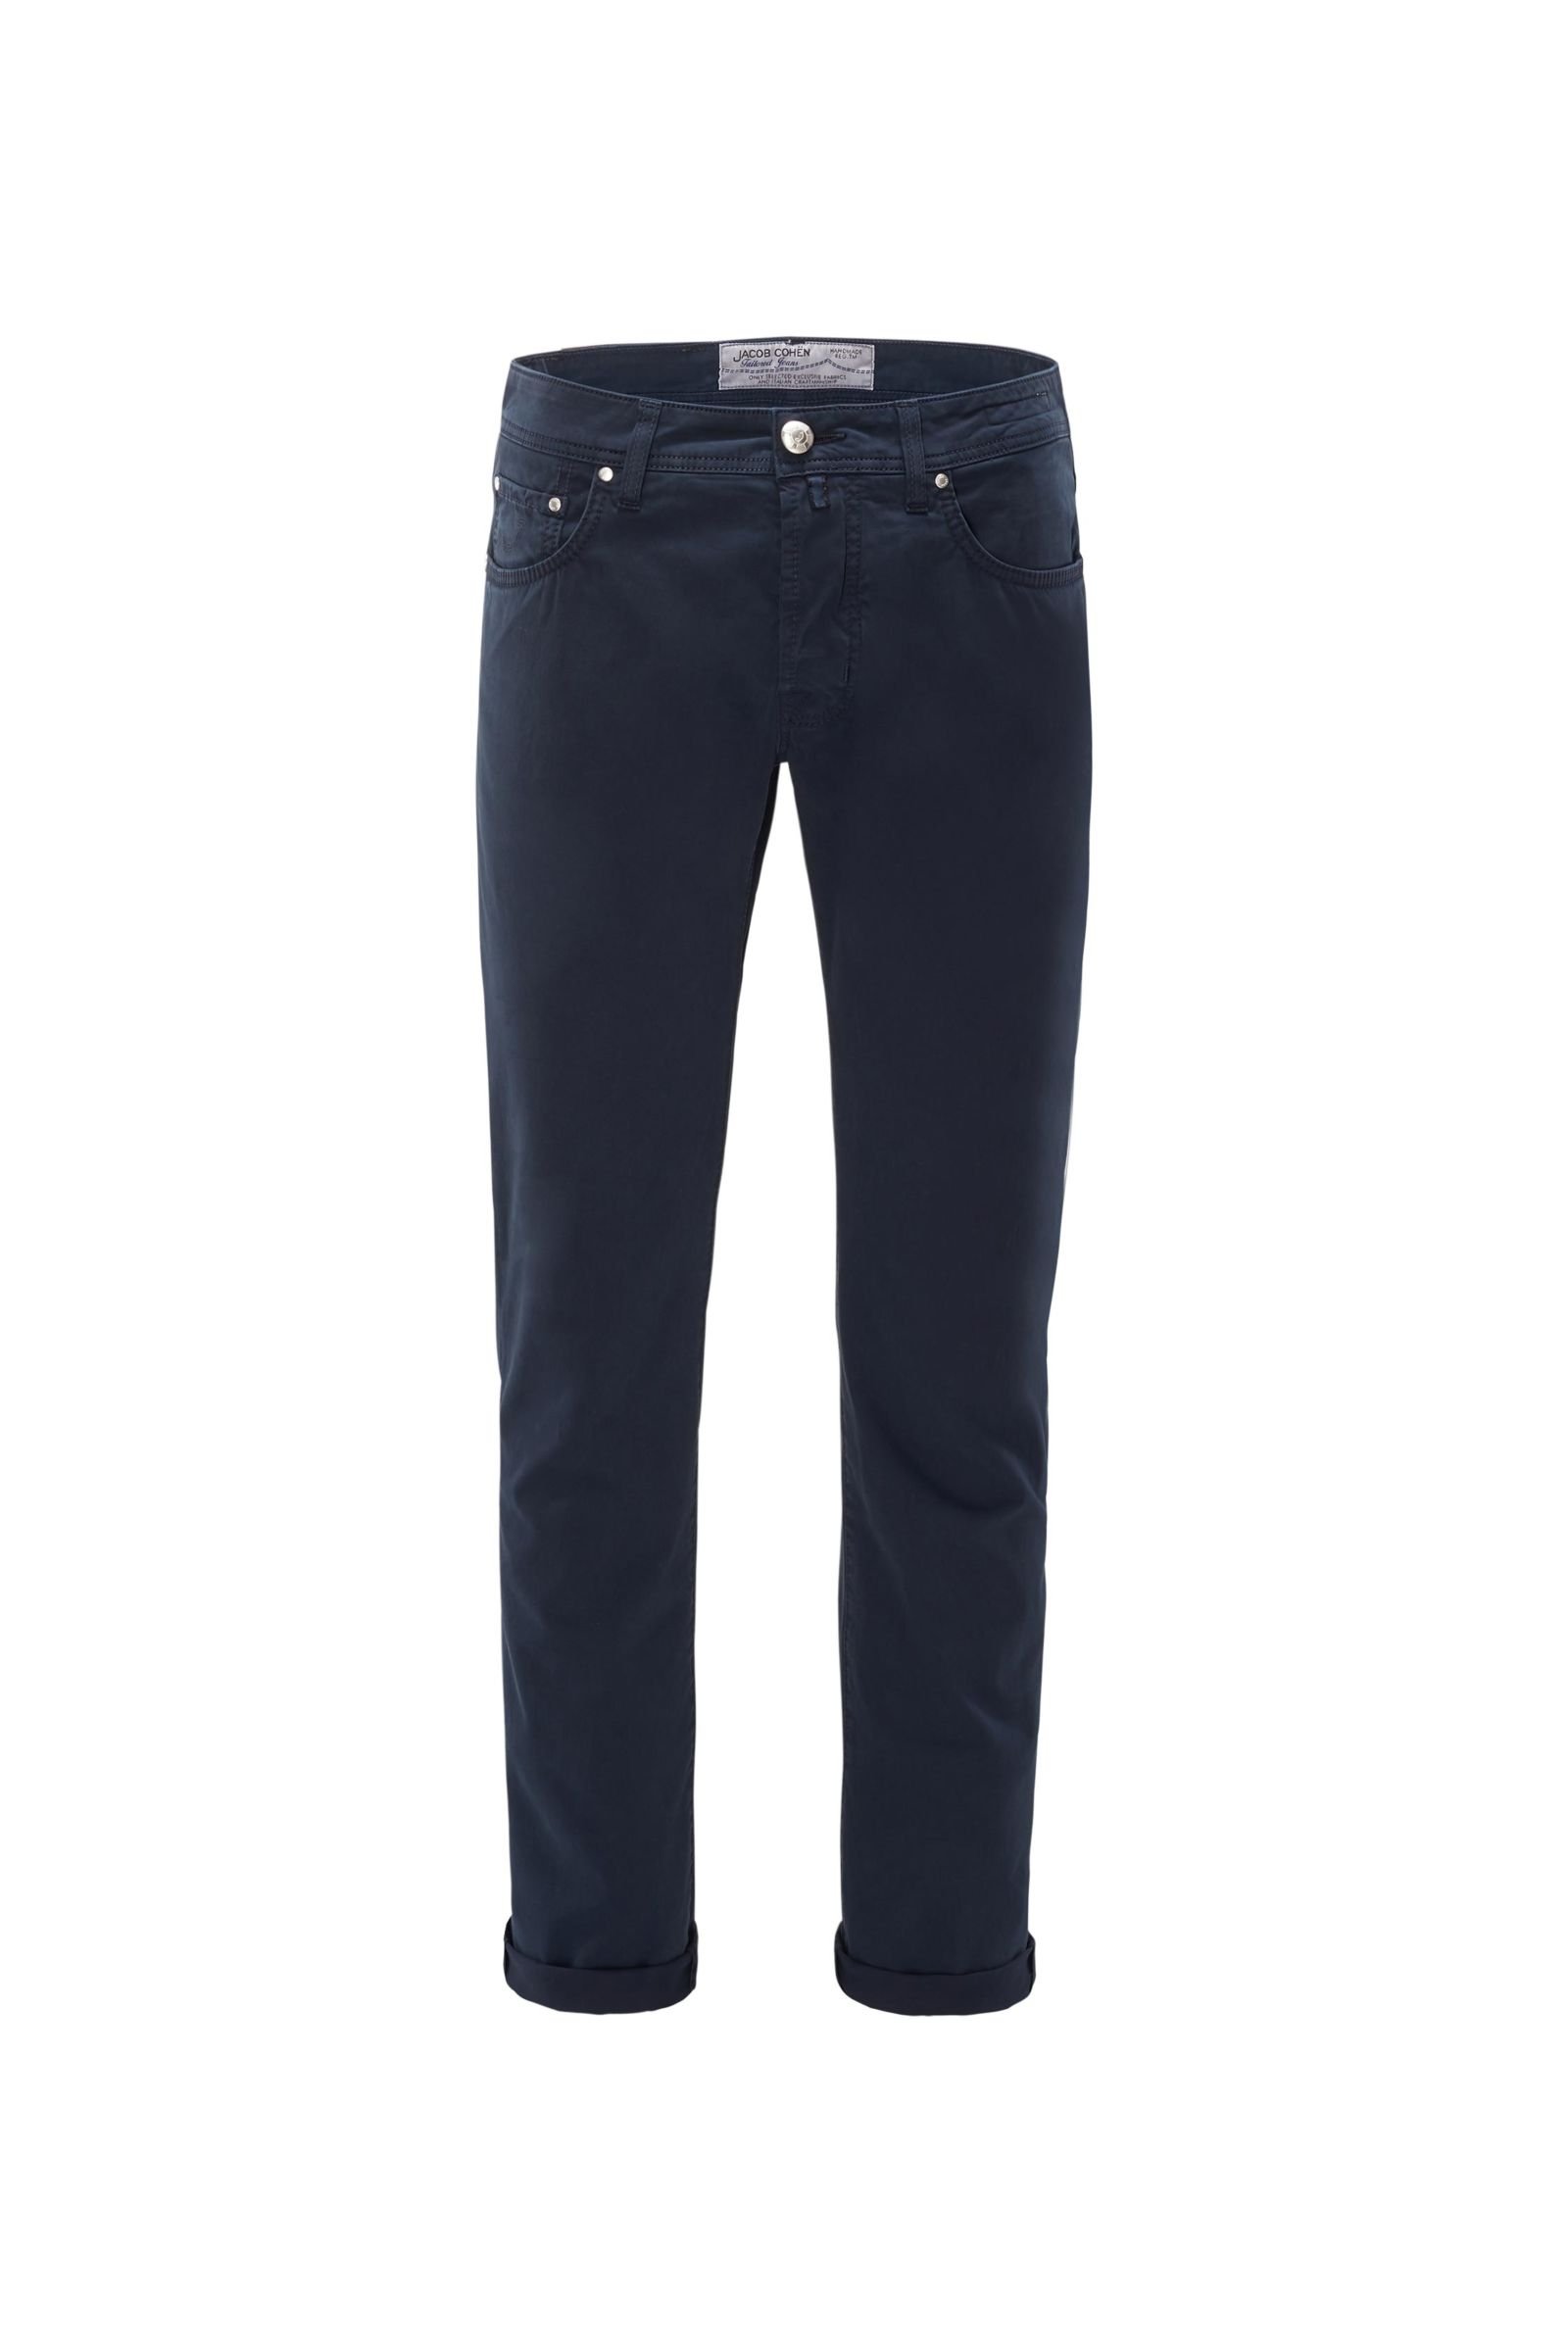 Cotton trousers 'PW688 Comfort Slim Fit' navy